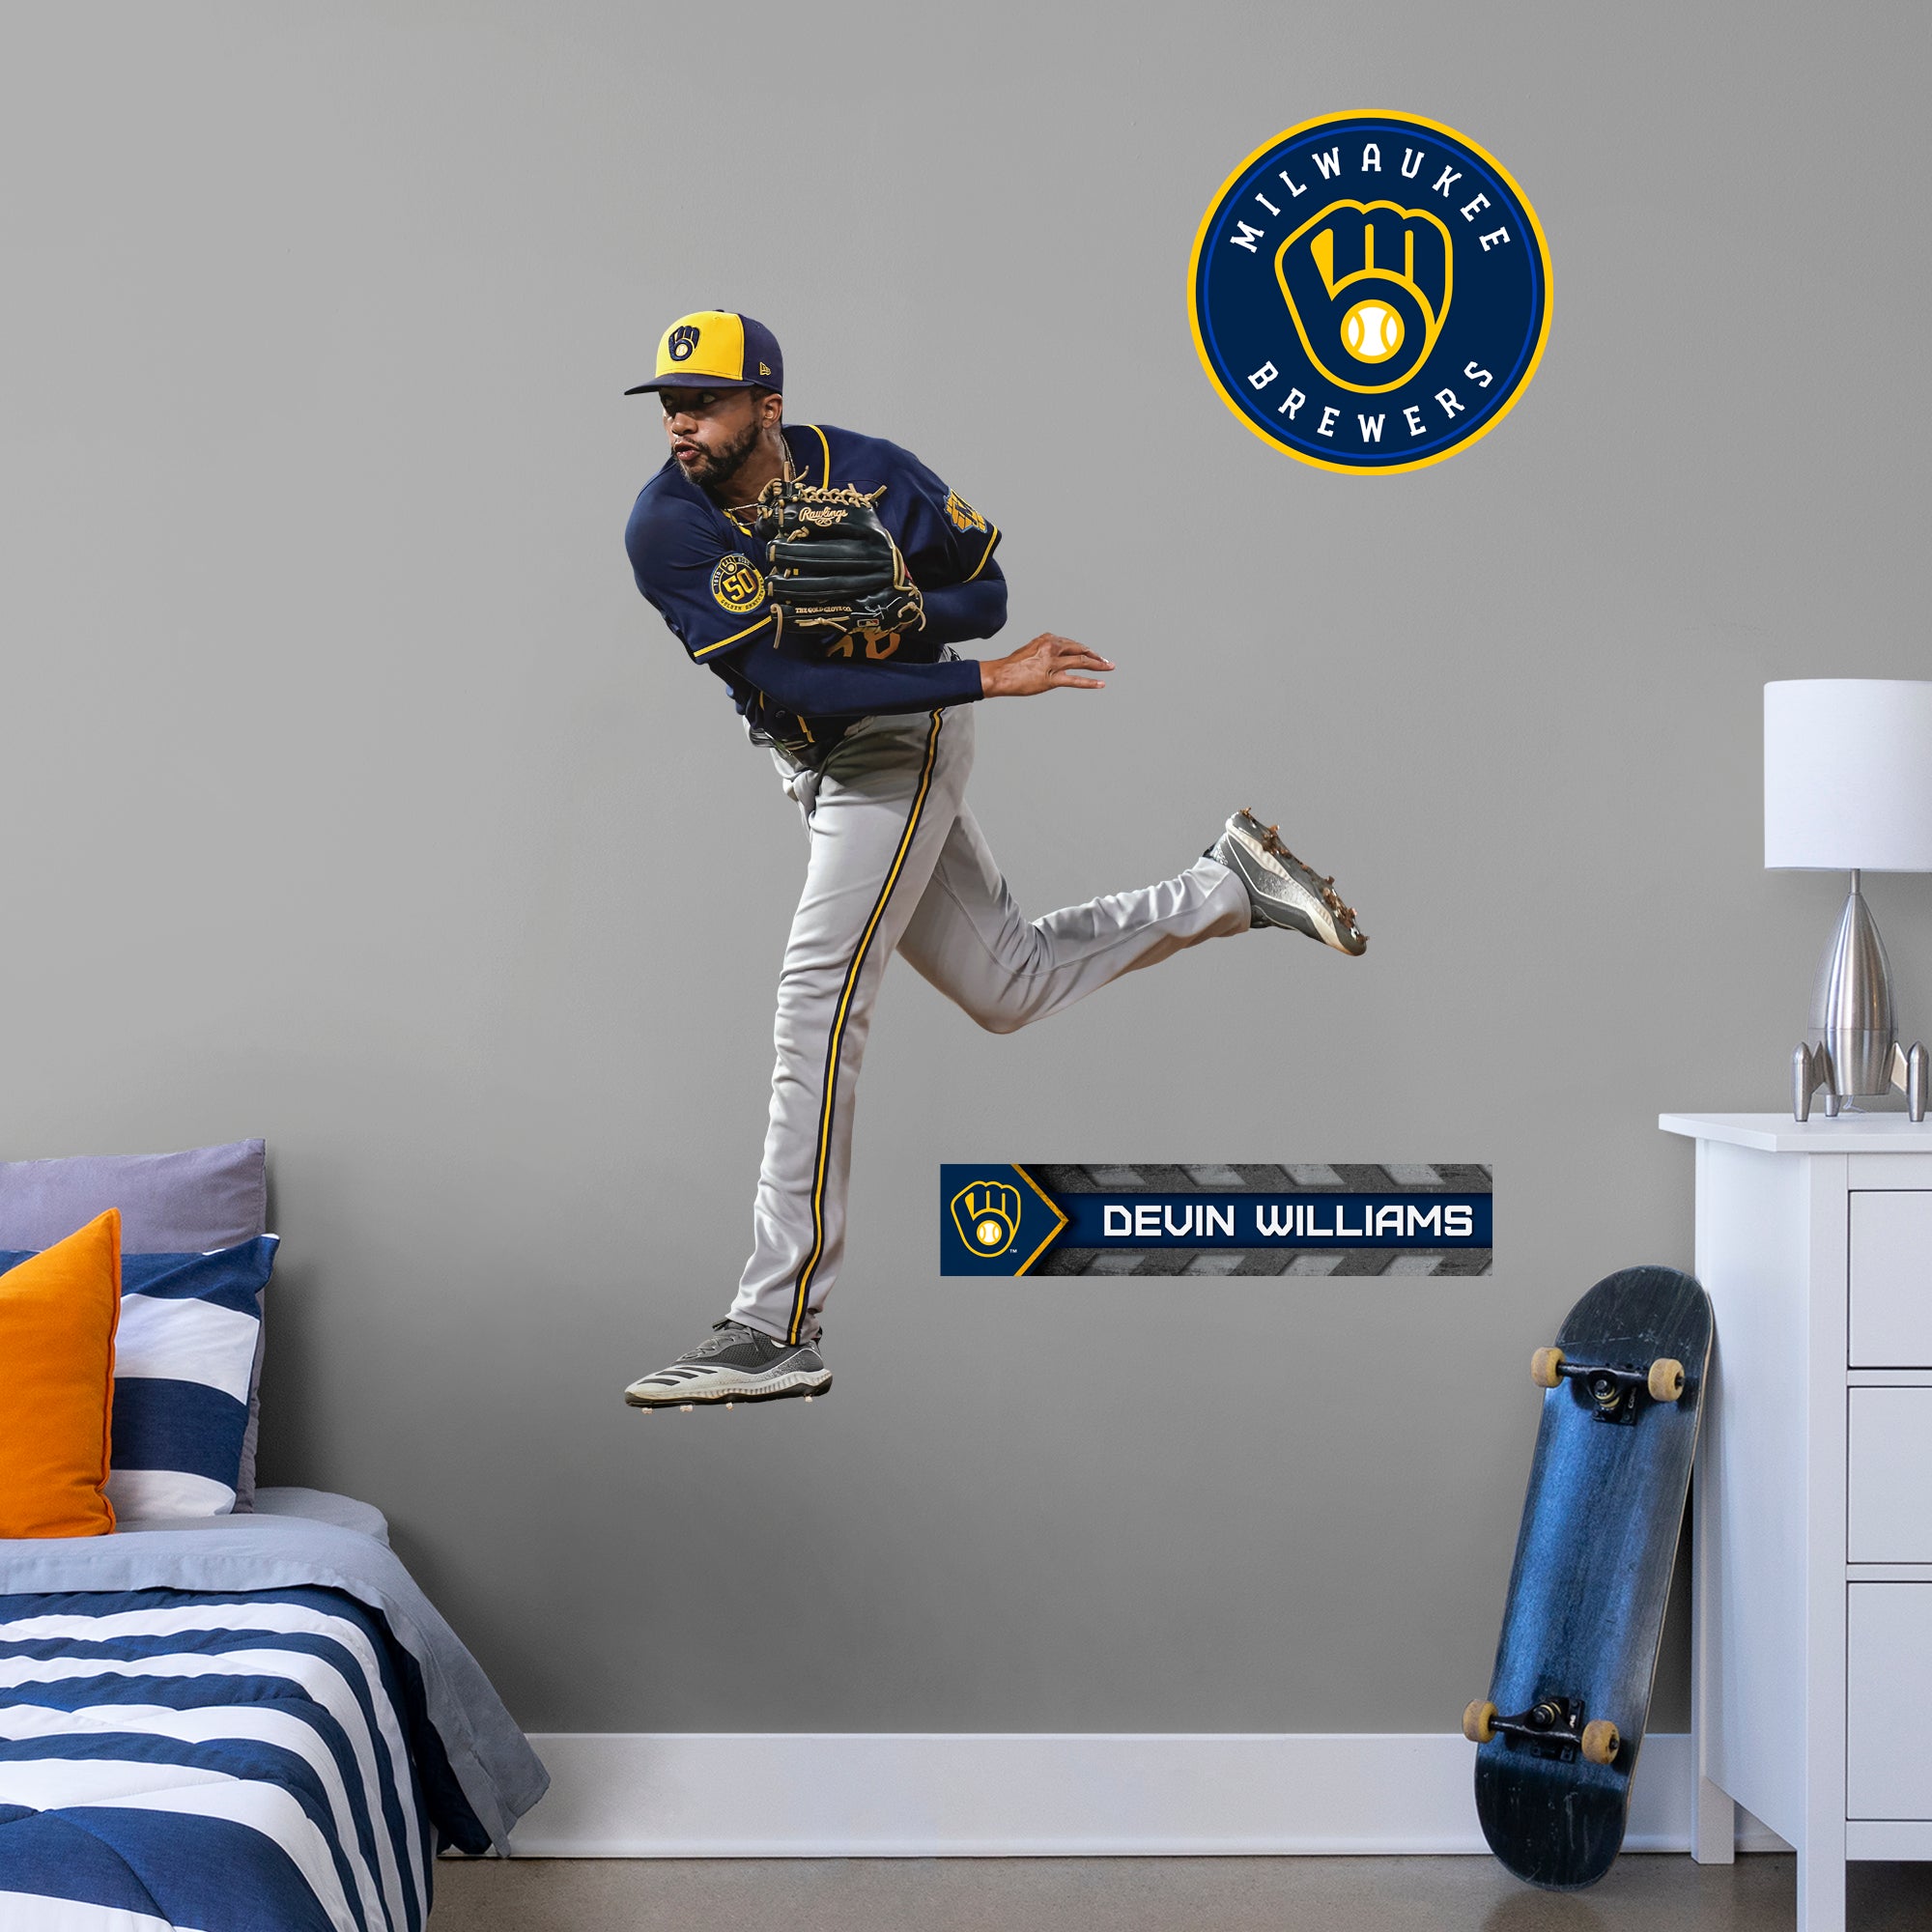 Devin Williams 2020 - Officially Licensed MLB Removable Wall Decal Giant Athlete + 2 Decals (51"W x 34"H) by Fathead | Vinyl